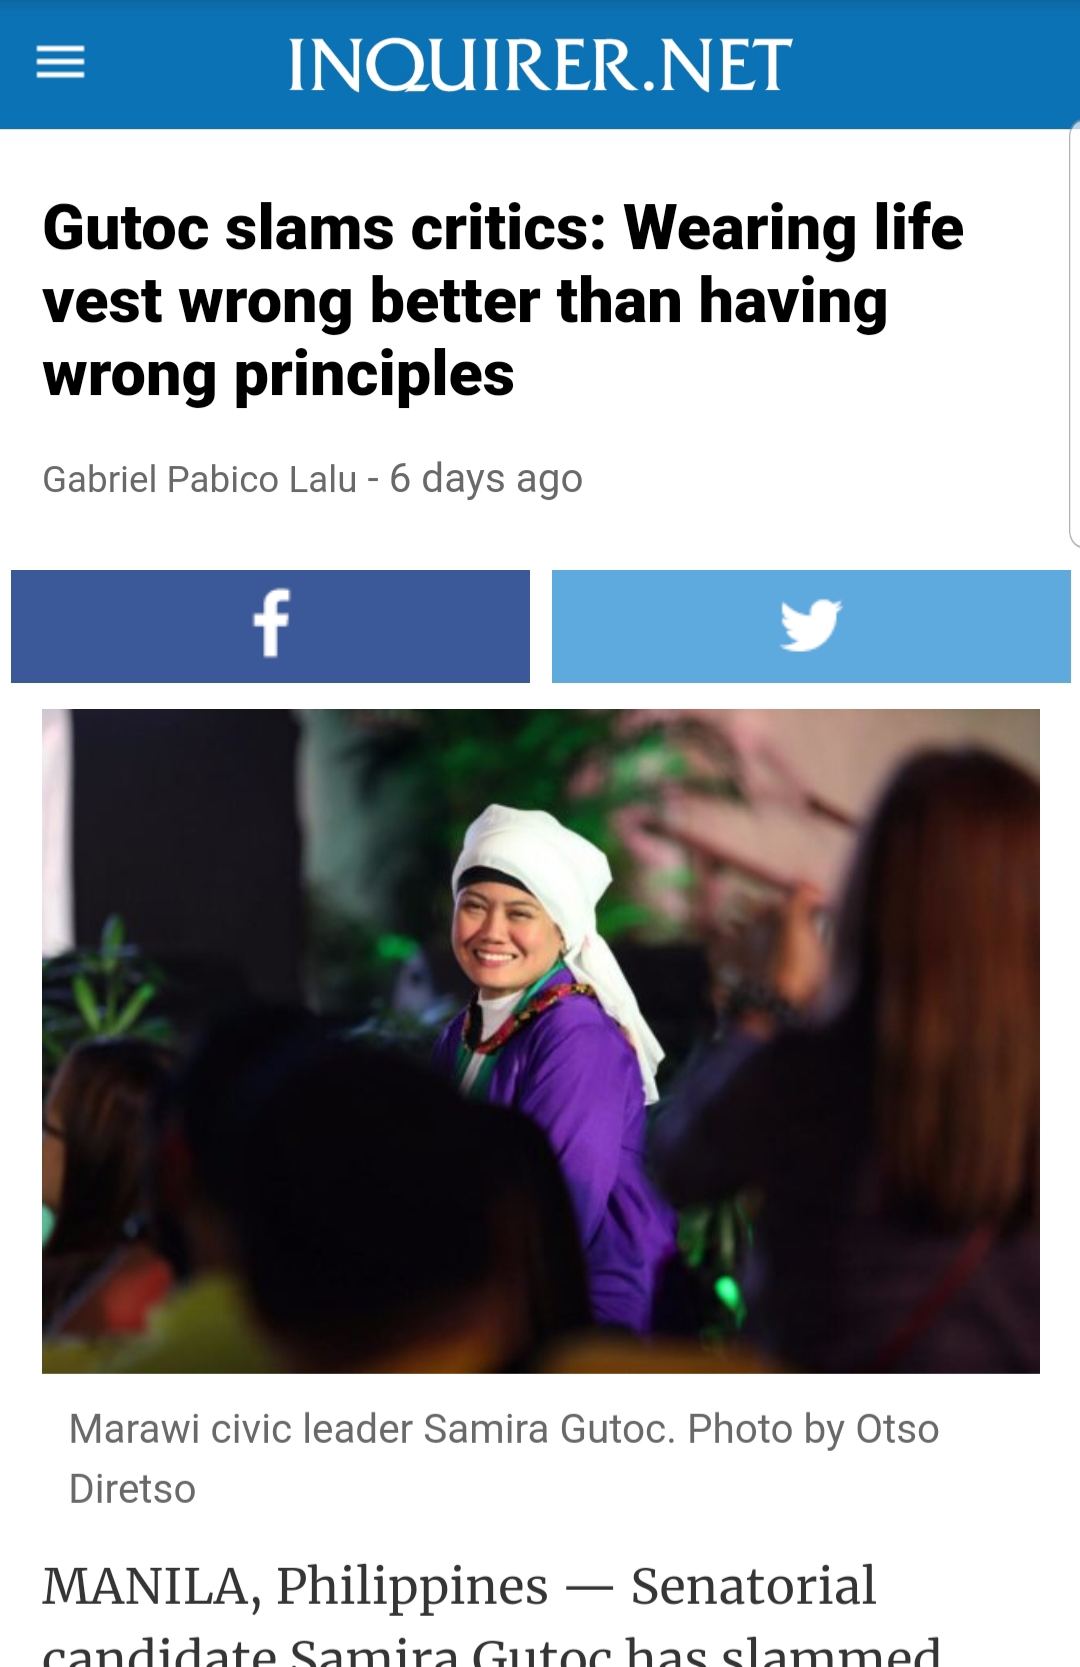 ORIGINAL ARTICLE. Screenshot of Inquirer's original article on Gutoc telling critics wearing a life vest wrong is better than having wrong principles 